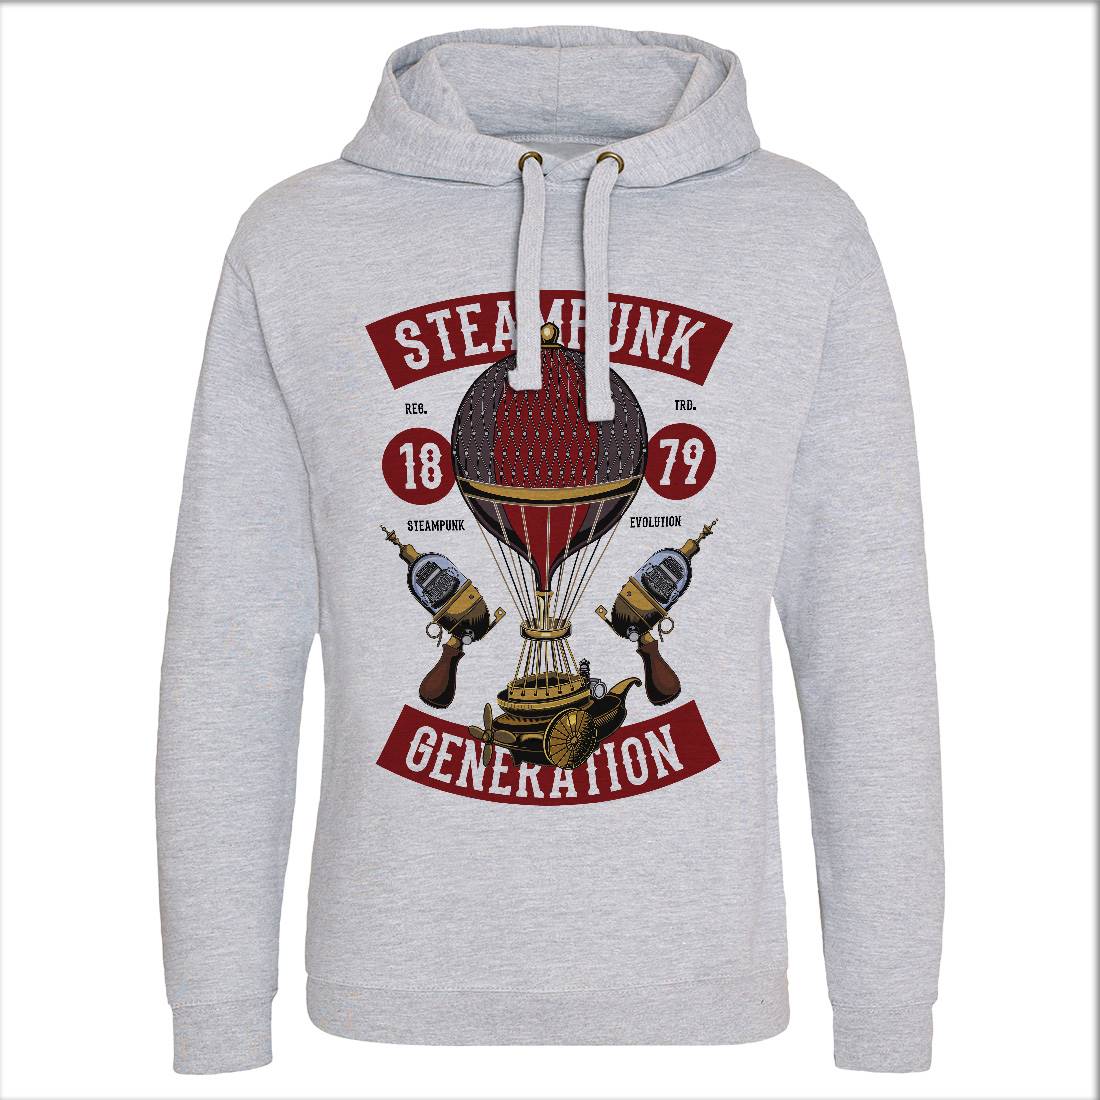 Generation Mens Hoodie Without Pocket Steampunk C449